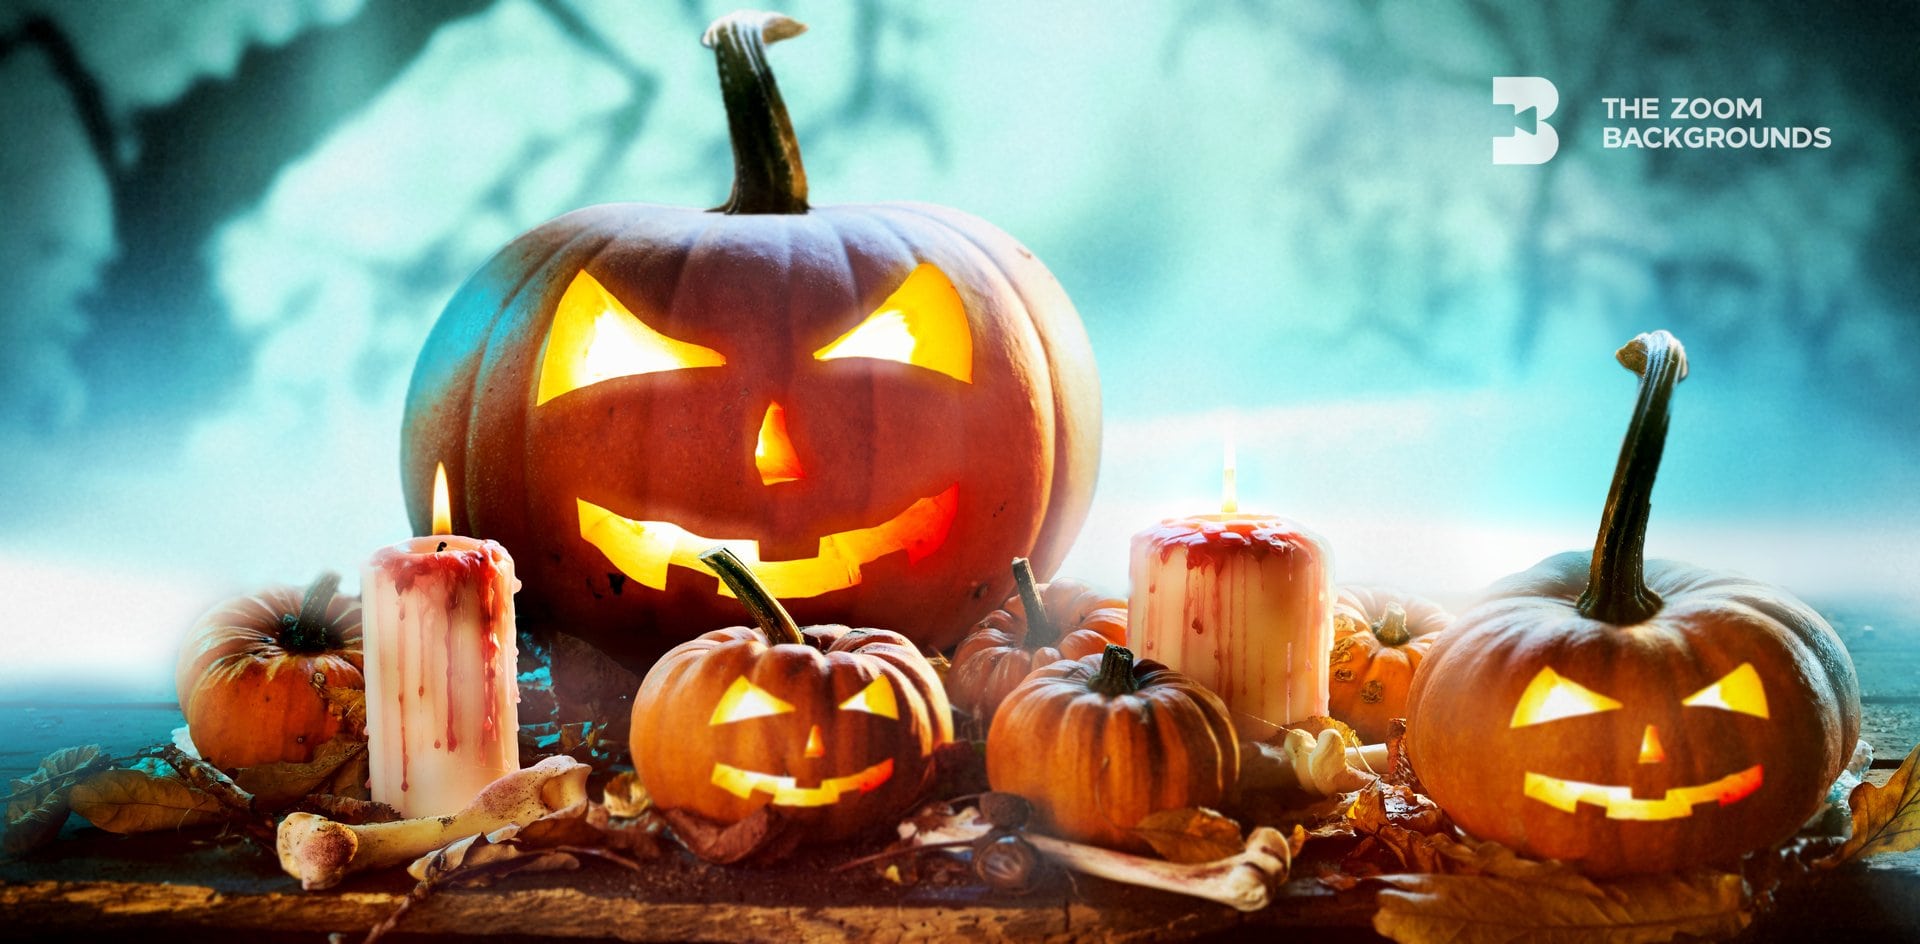 Scary halloween pumpkins – thezoombackgrounds.com